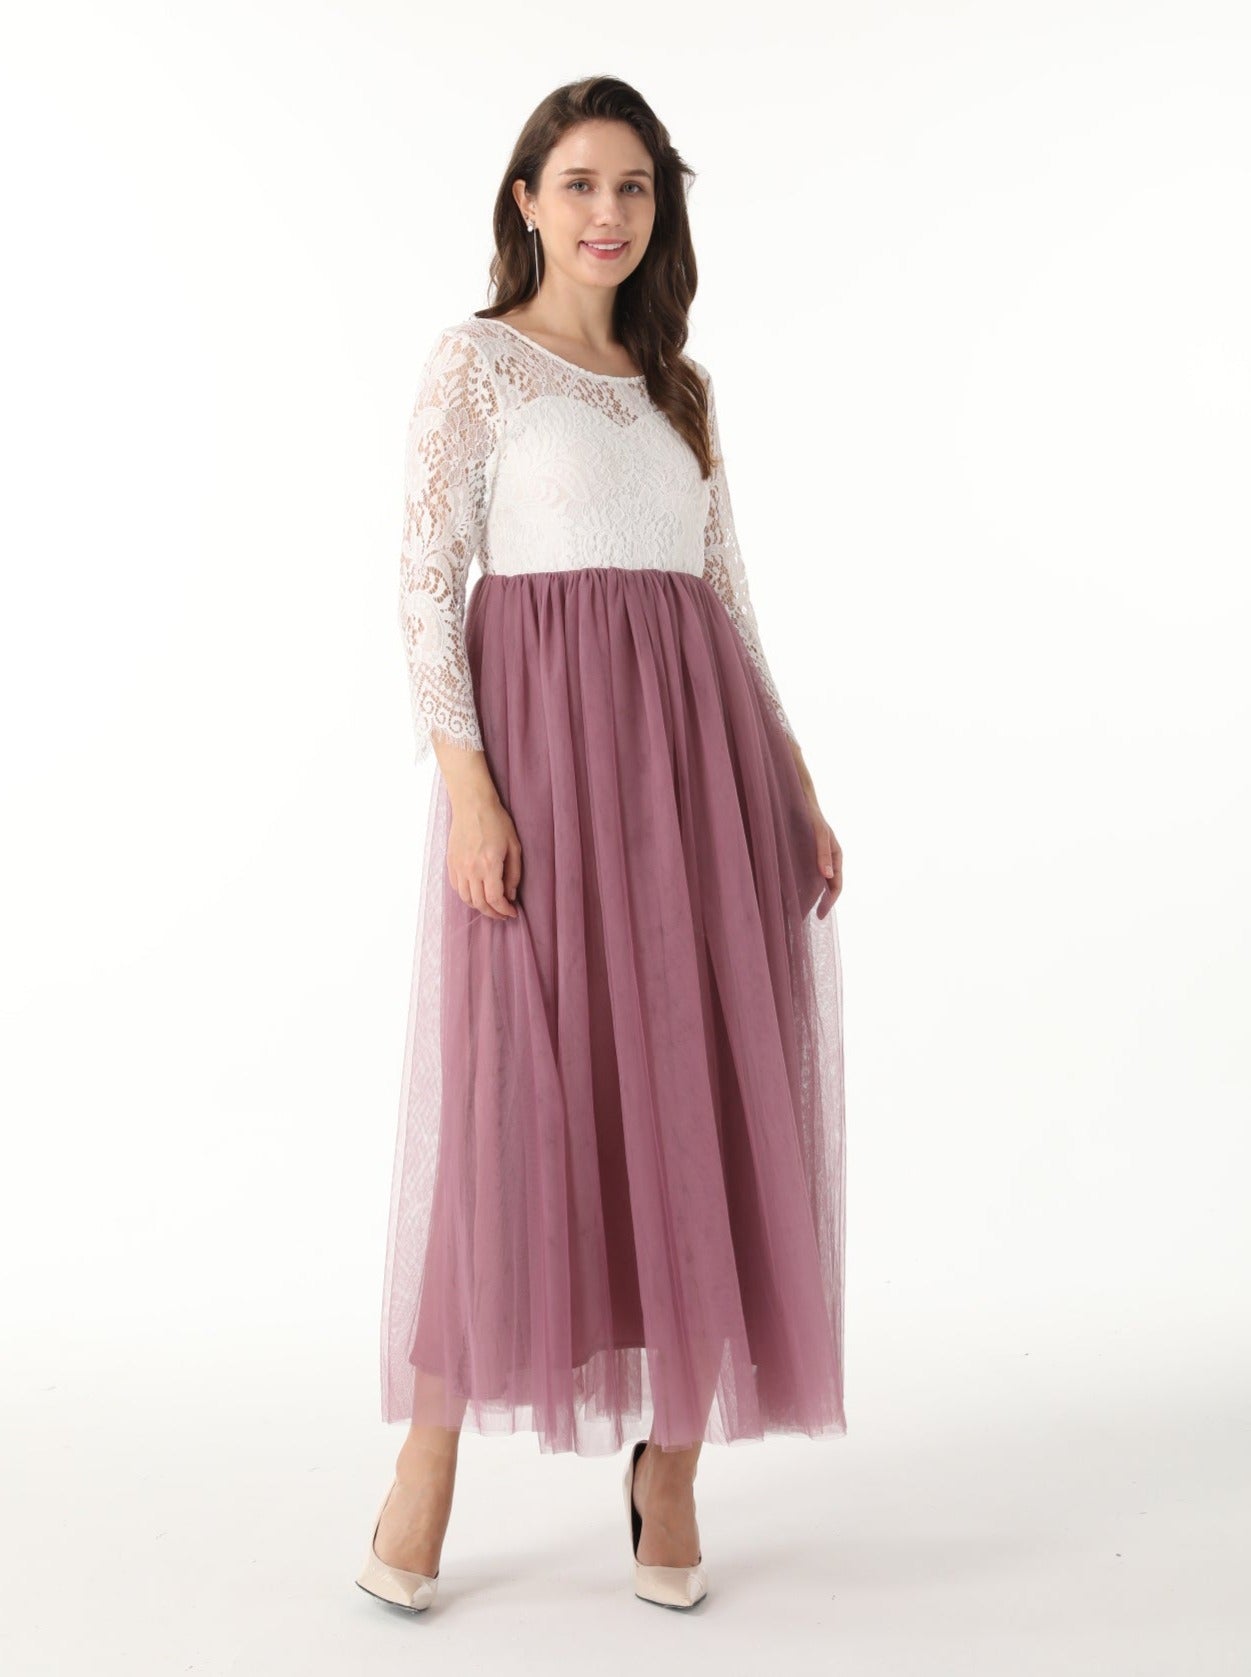 Peony Lace Dress for Women in Mauve